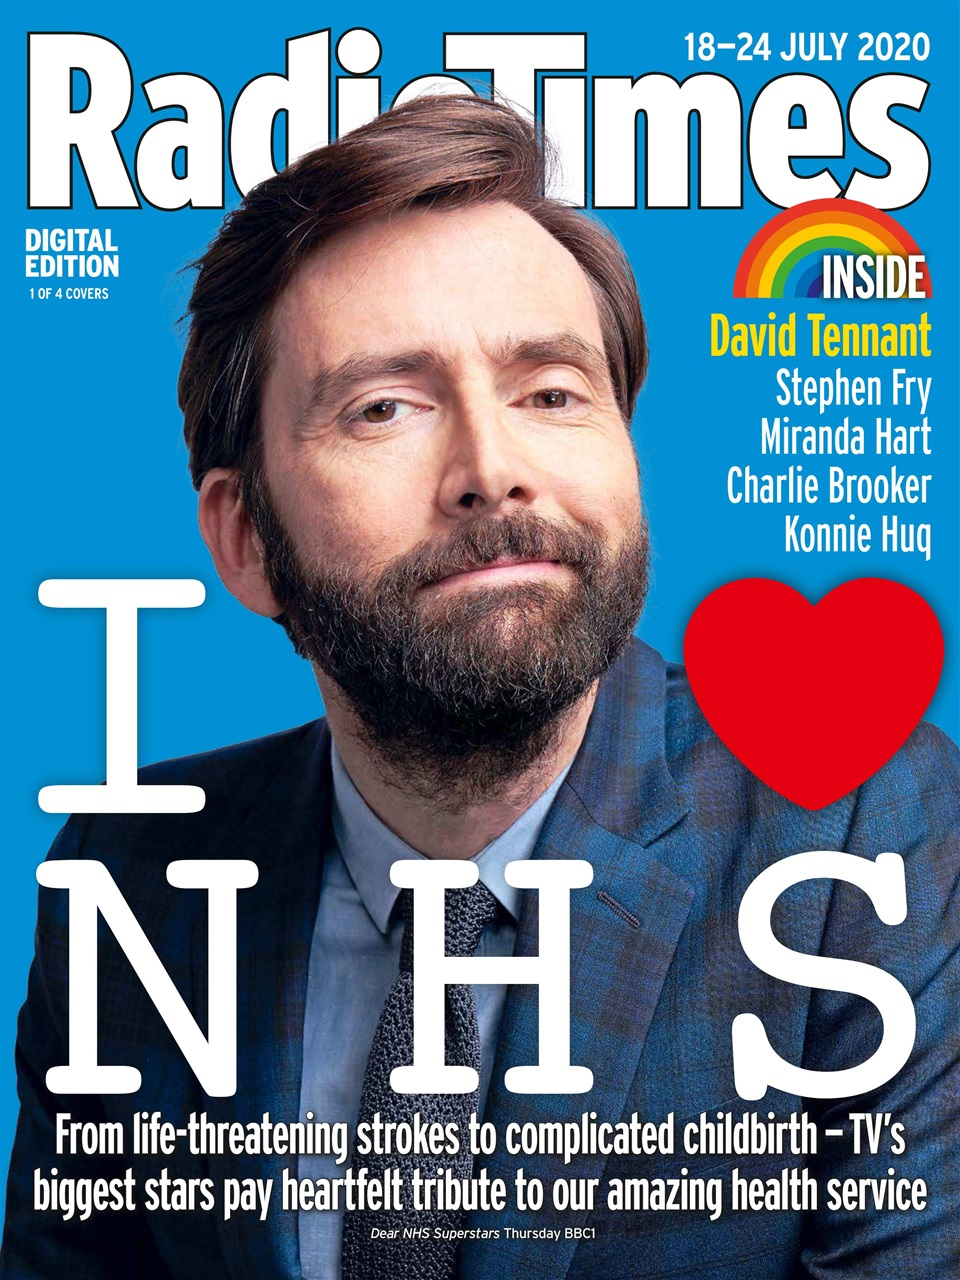 David Tennant on the Radio Times cover